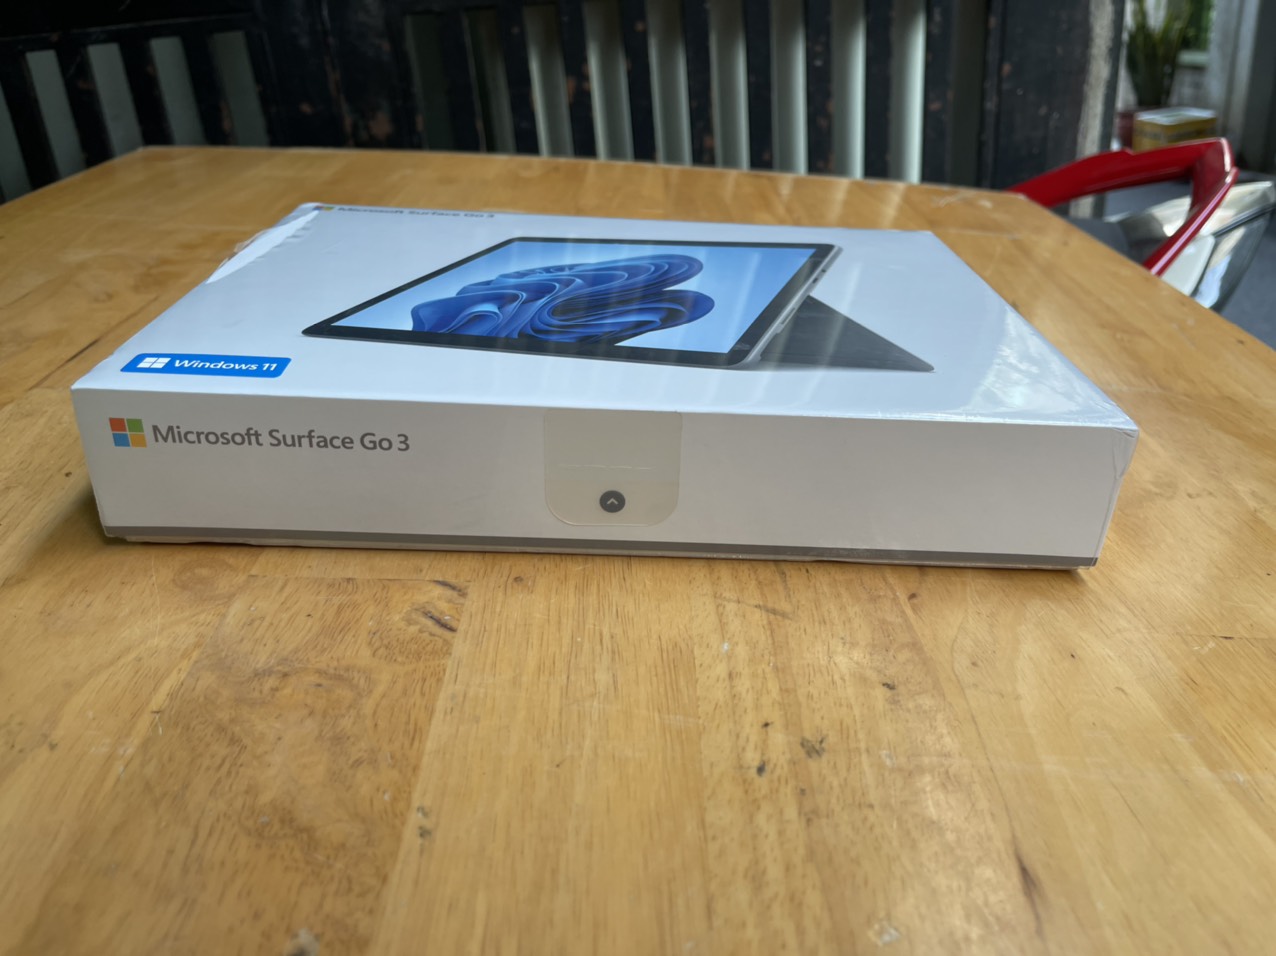 Microsoft Surface Go 3, Pentium Gold 6500Y, 4G, 64G, new seal 100%